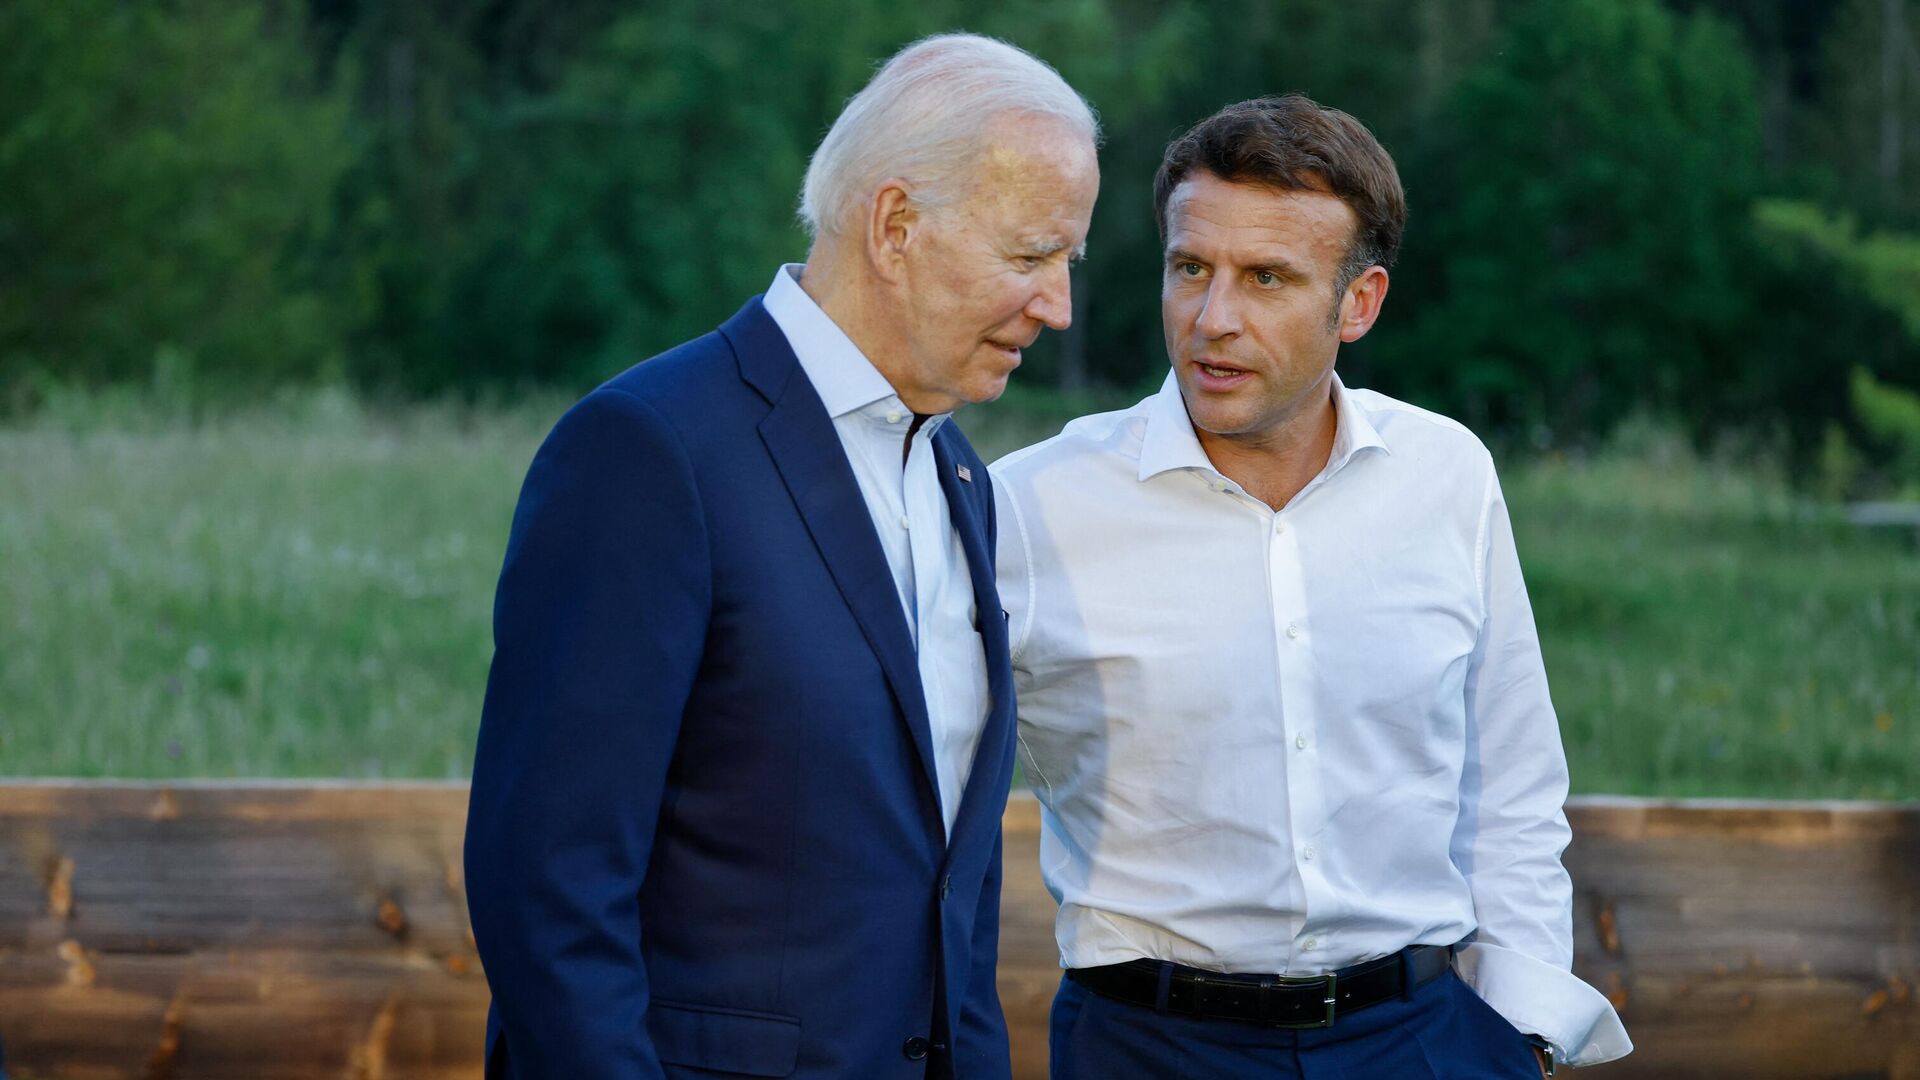 US President Joe Biden and French President Emmanuel Macron speak after posing for an informal group photo at a bench after a working dinner during the G7 Summit held at Elmau Castle, southern Germany on June 26, 2022. - Sputnik International, 1920, 29.11.2022